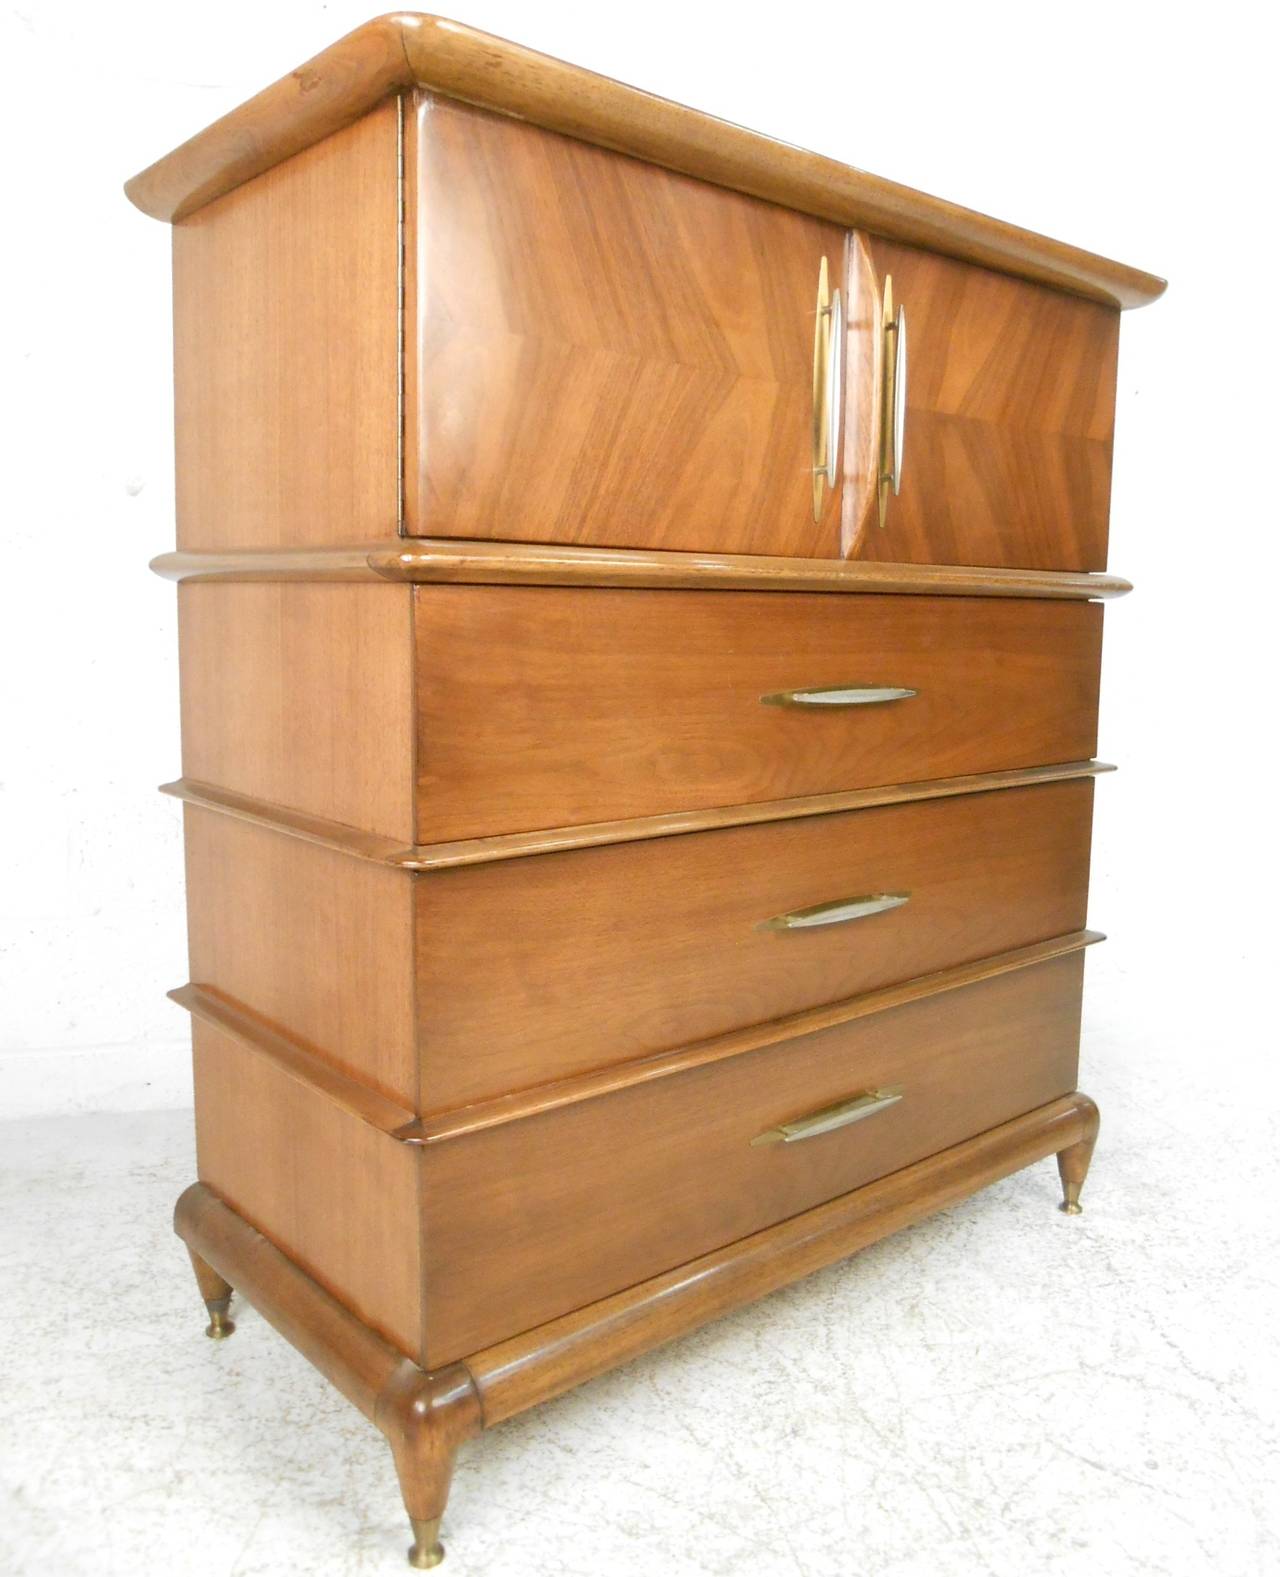 This unique walnut dresser by Kent Coffey is from his line 